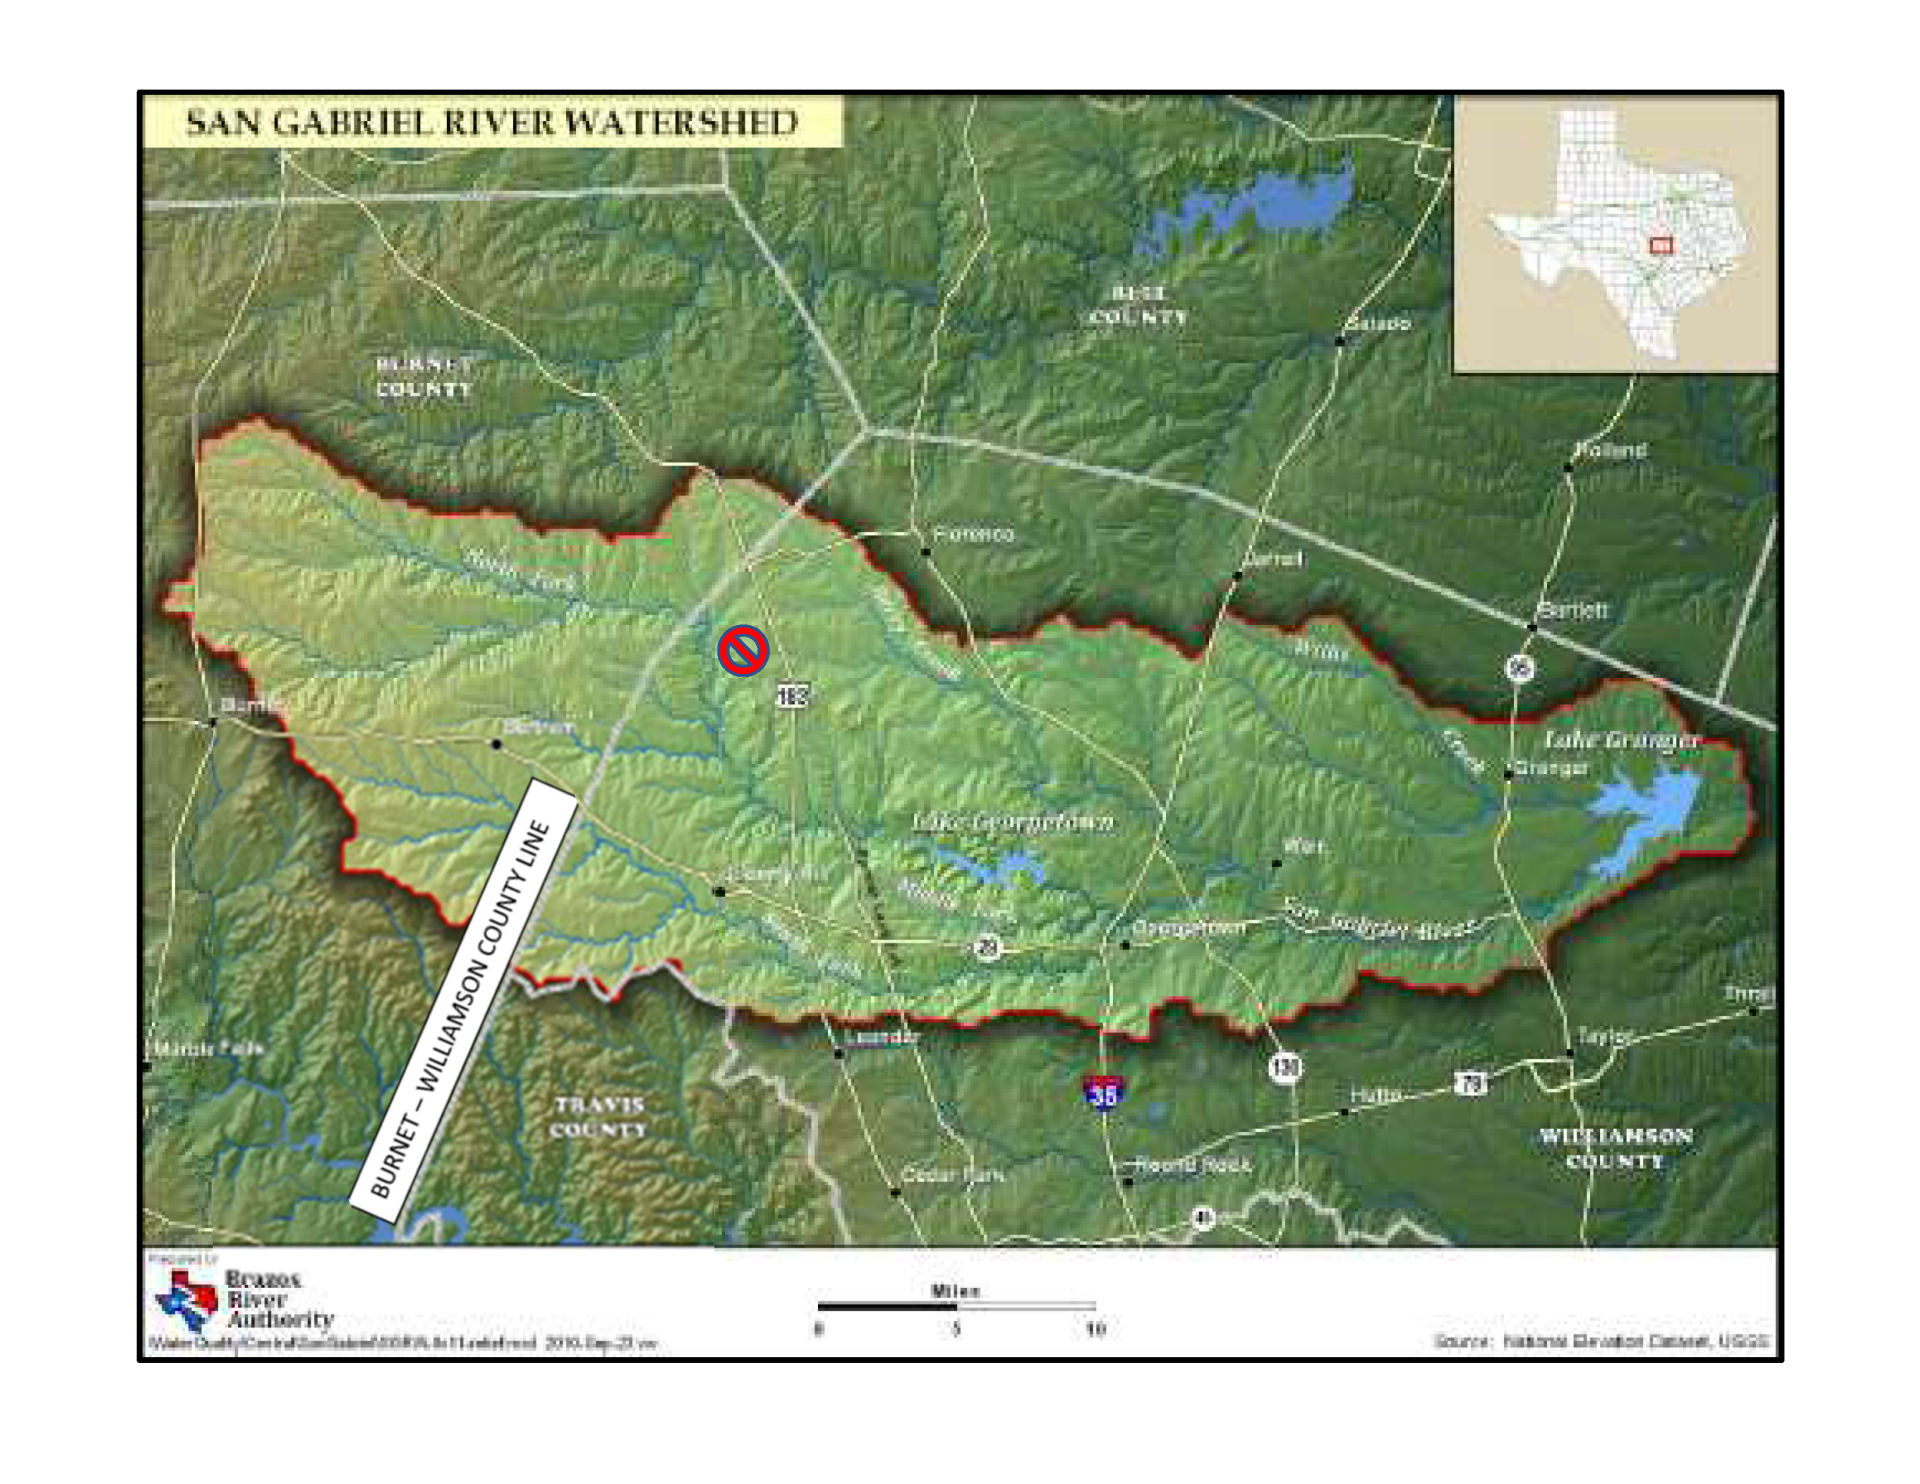 San Gabriel River Watershed from the Brazos River Authority